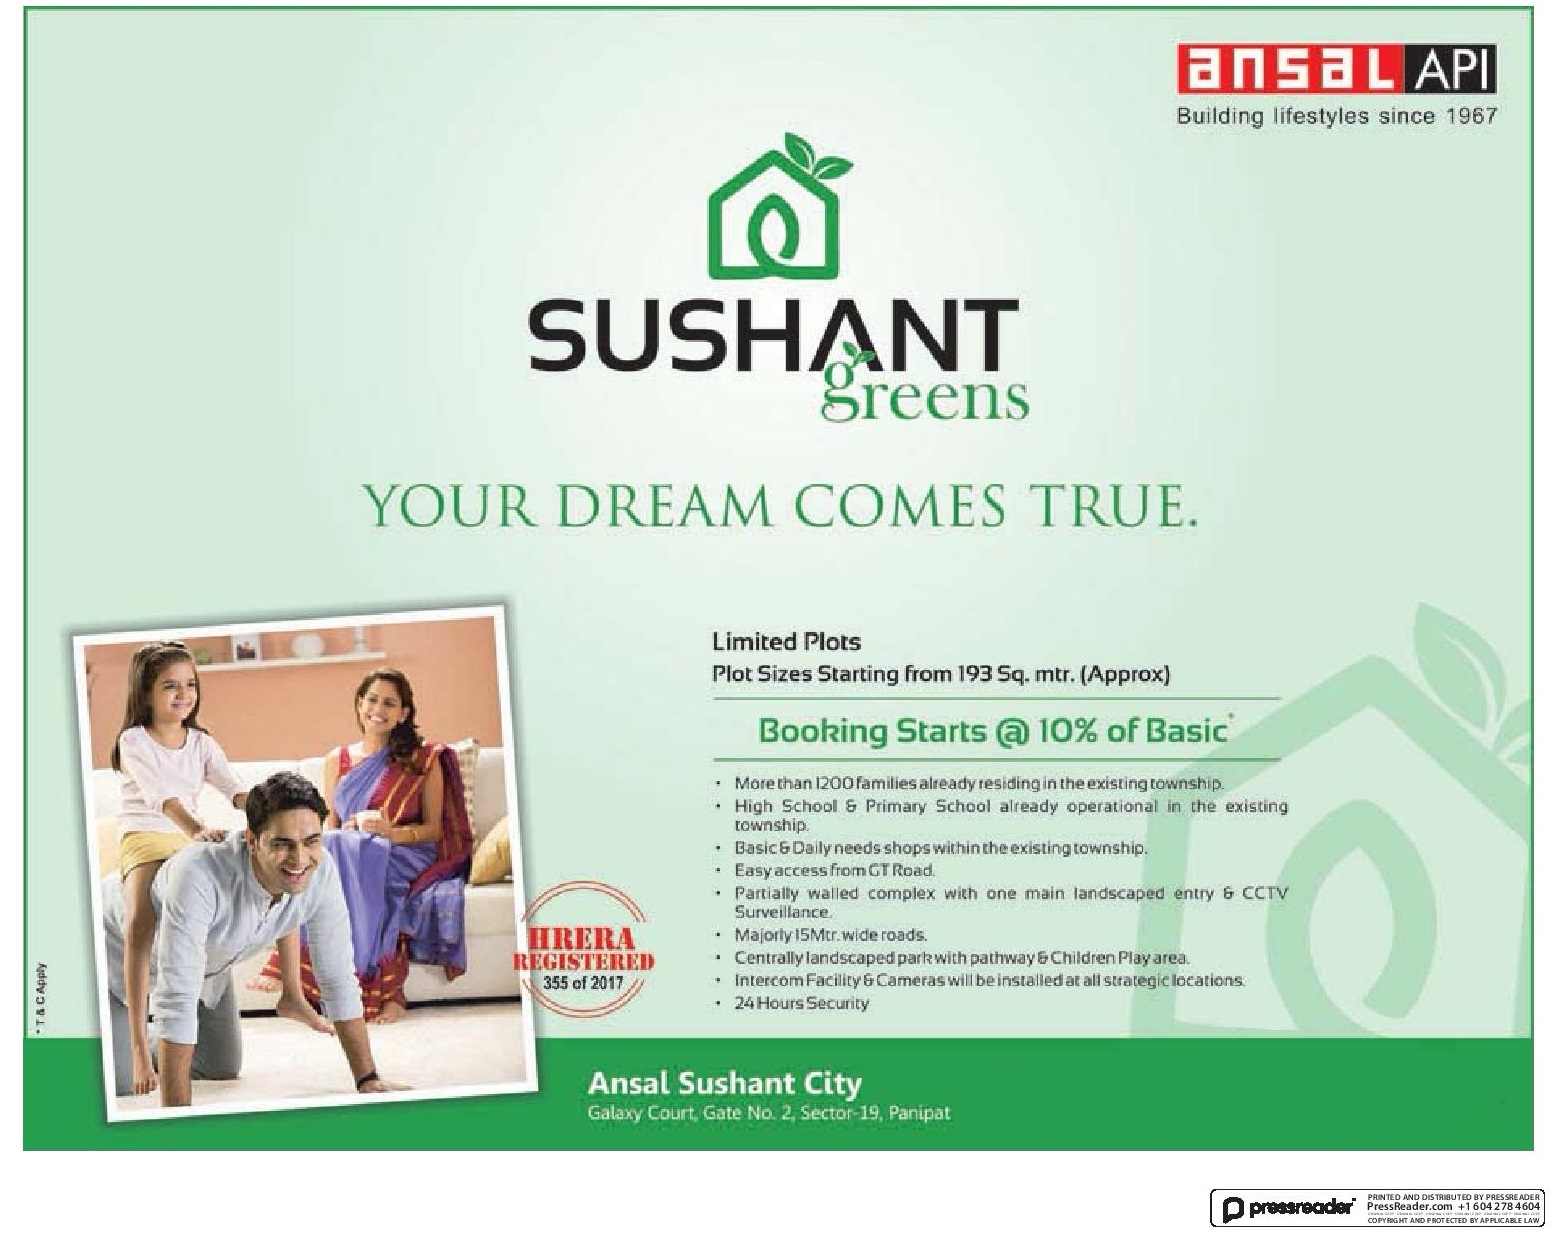 Make your dream come true by residing at Ansal Sushant City in Panipat Update